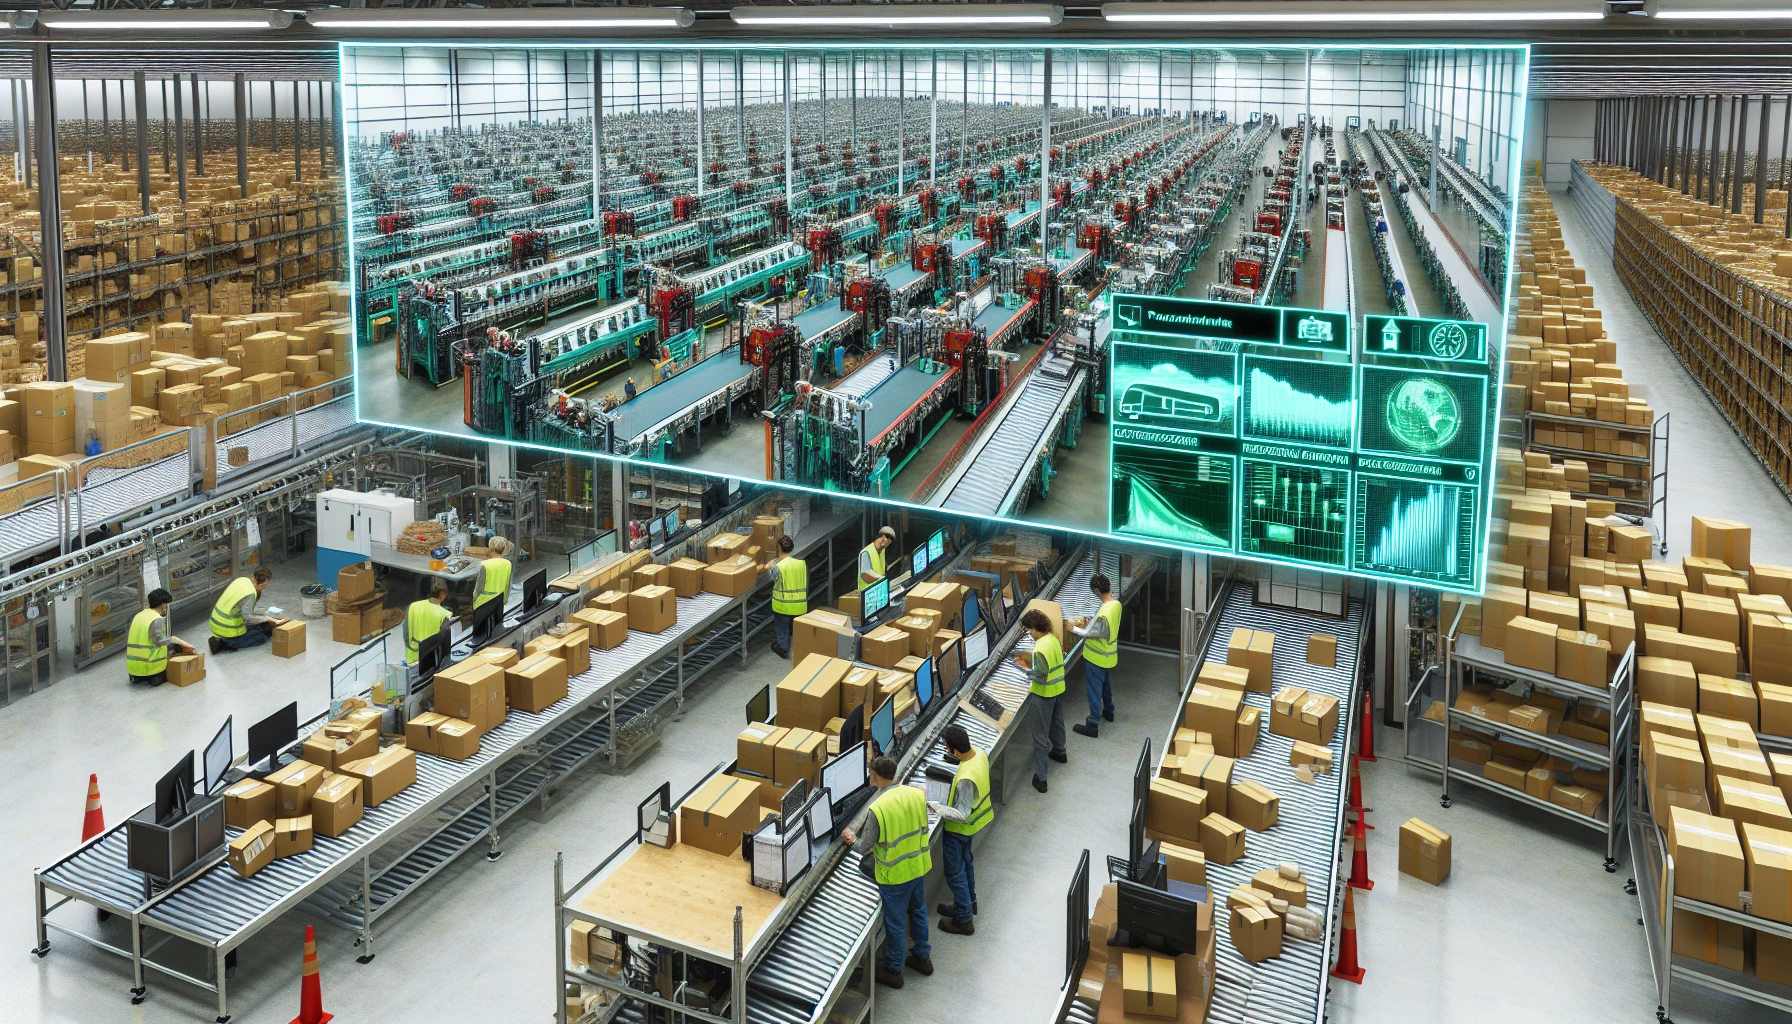 Monitoring workflow and productivity in distribution centers